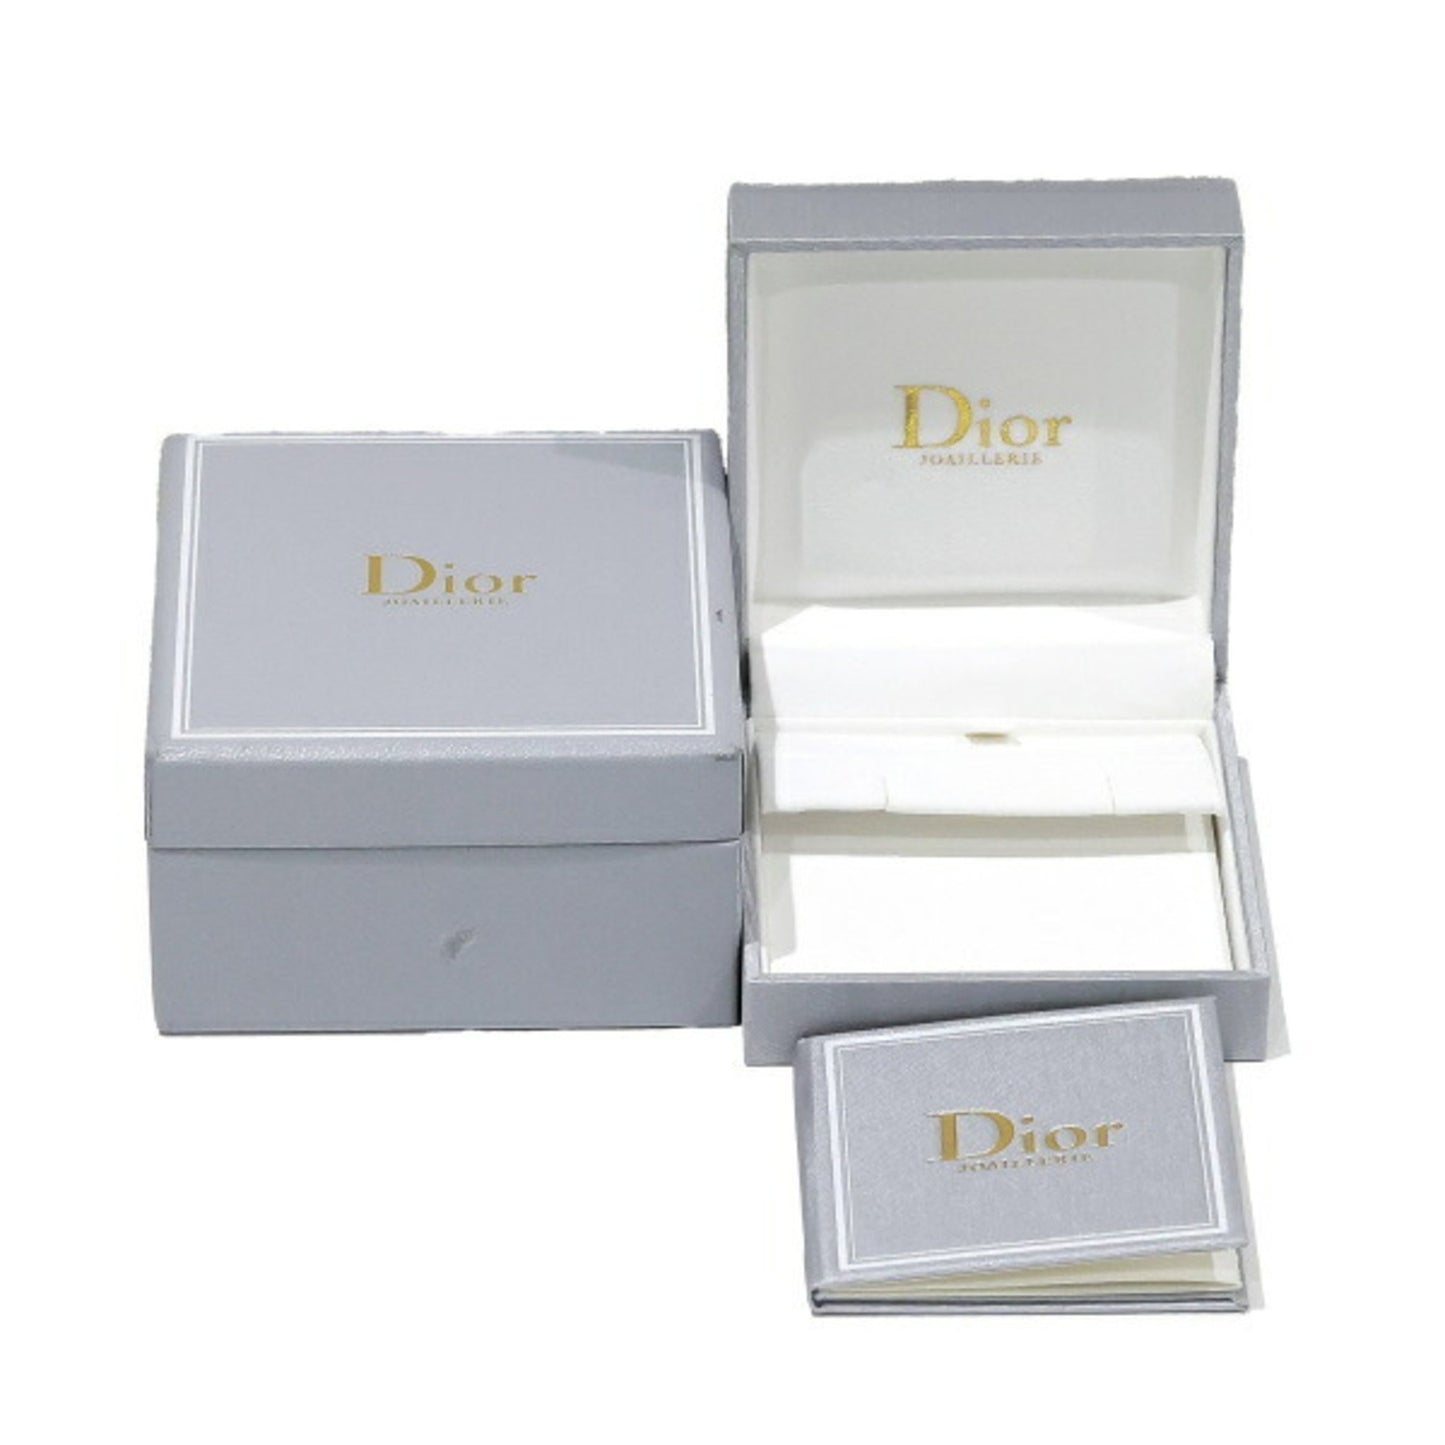 Dior Women's Christian Dior White Gold Stud Earrings in Silver